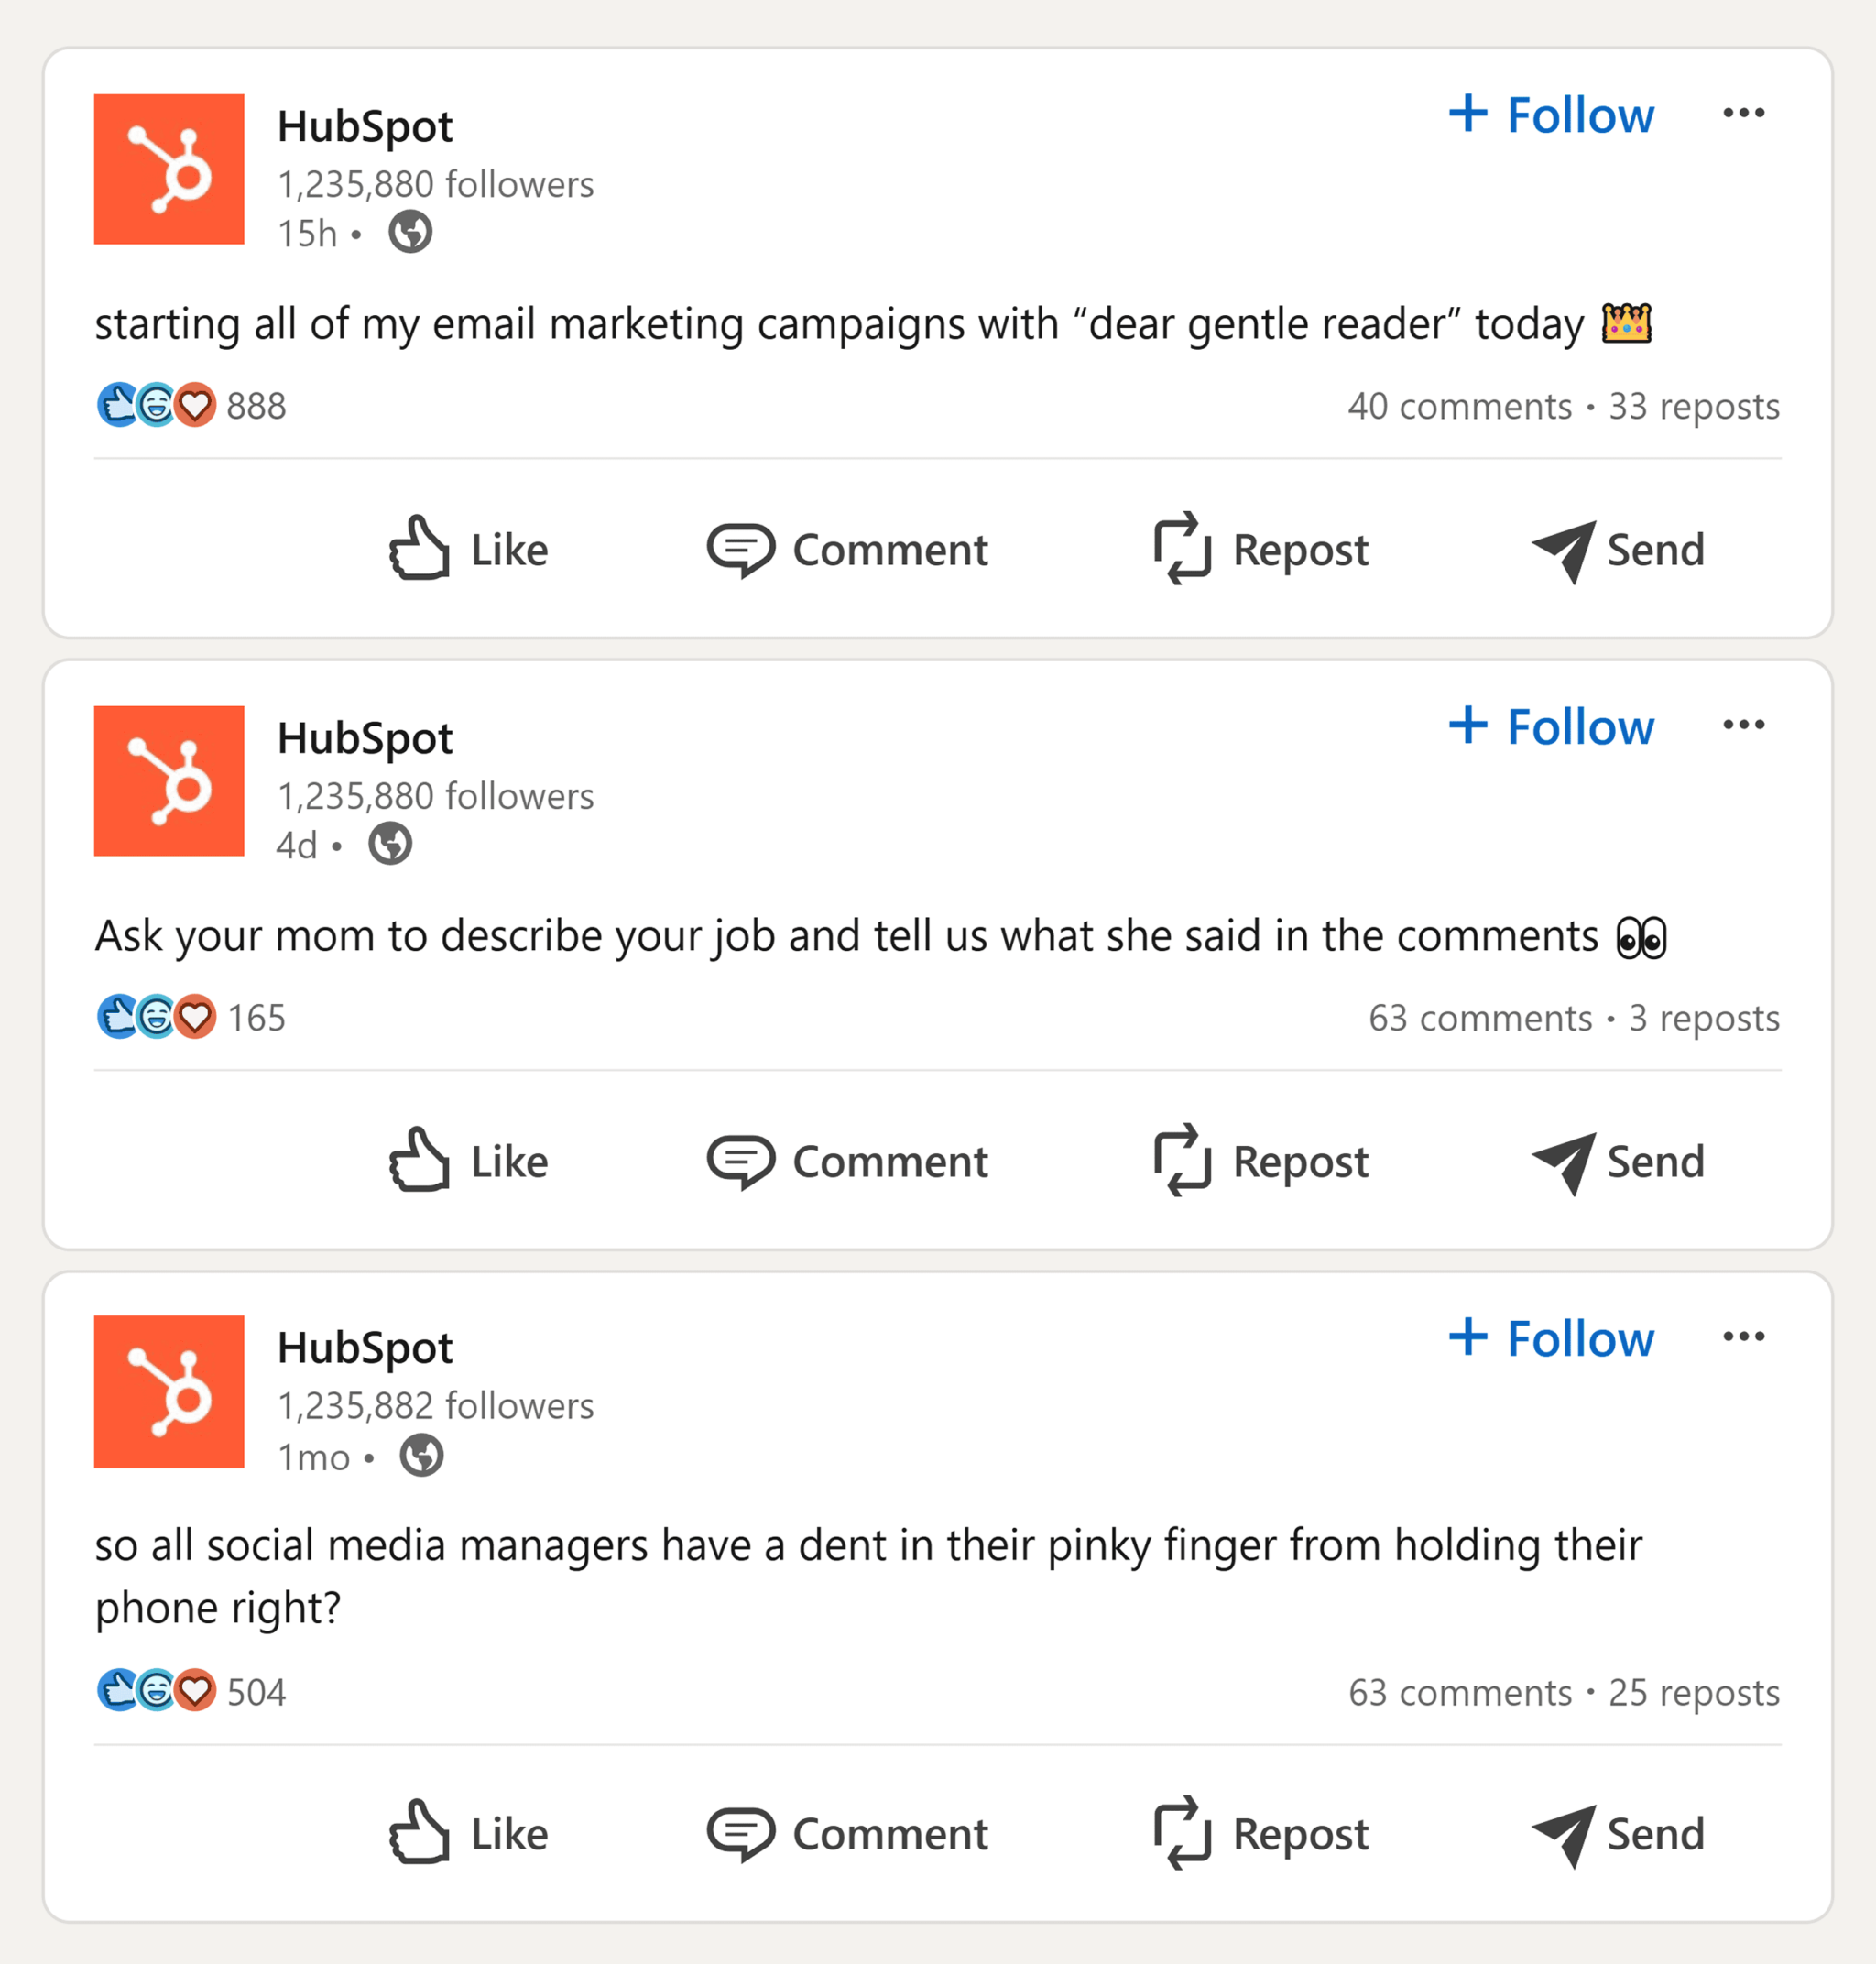 hubspot-linkedin-posts 22 Content Marketing Examples to Inspire You